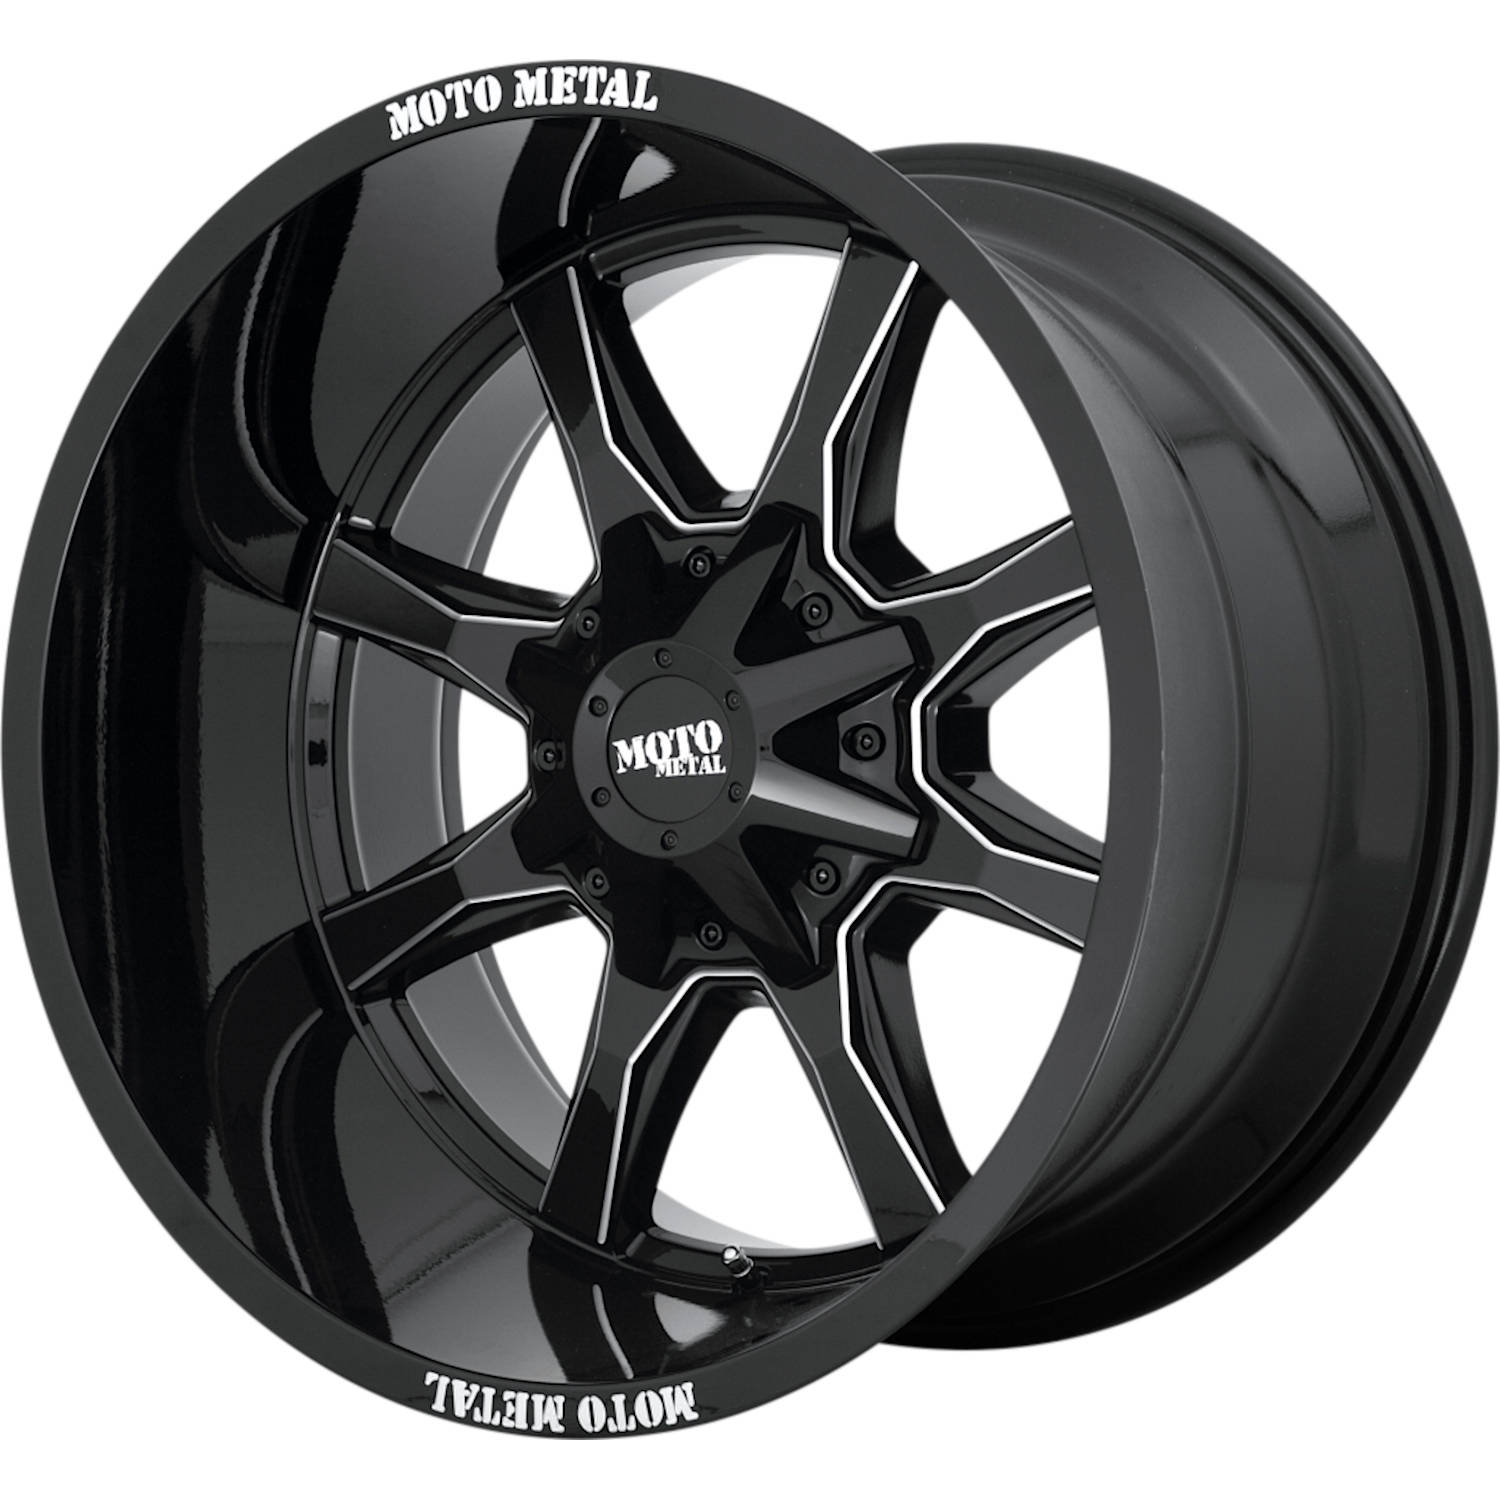 Moto Metal MO970 16x8 0 8x165.1 (8x6.5) Gloss Black with Milled Spoke Edges - Tires and Engine Performance